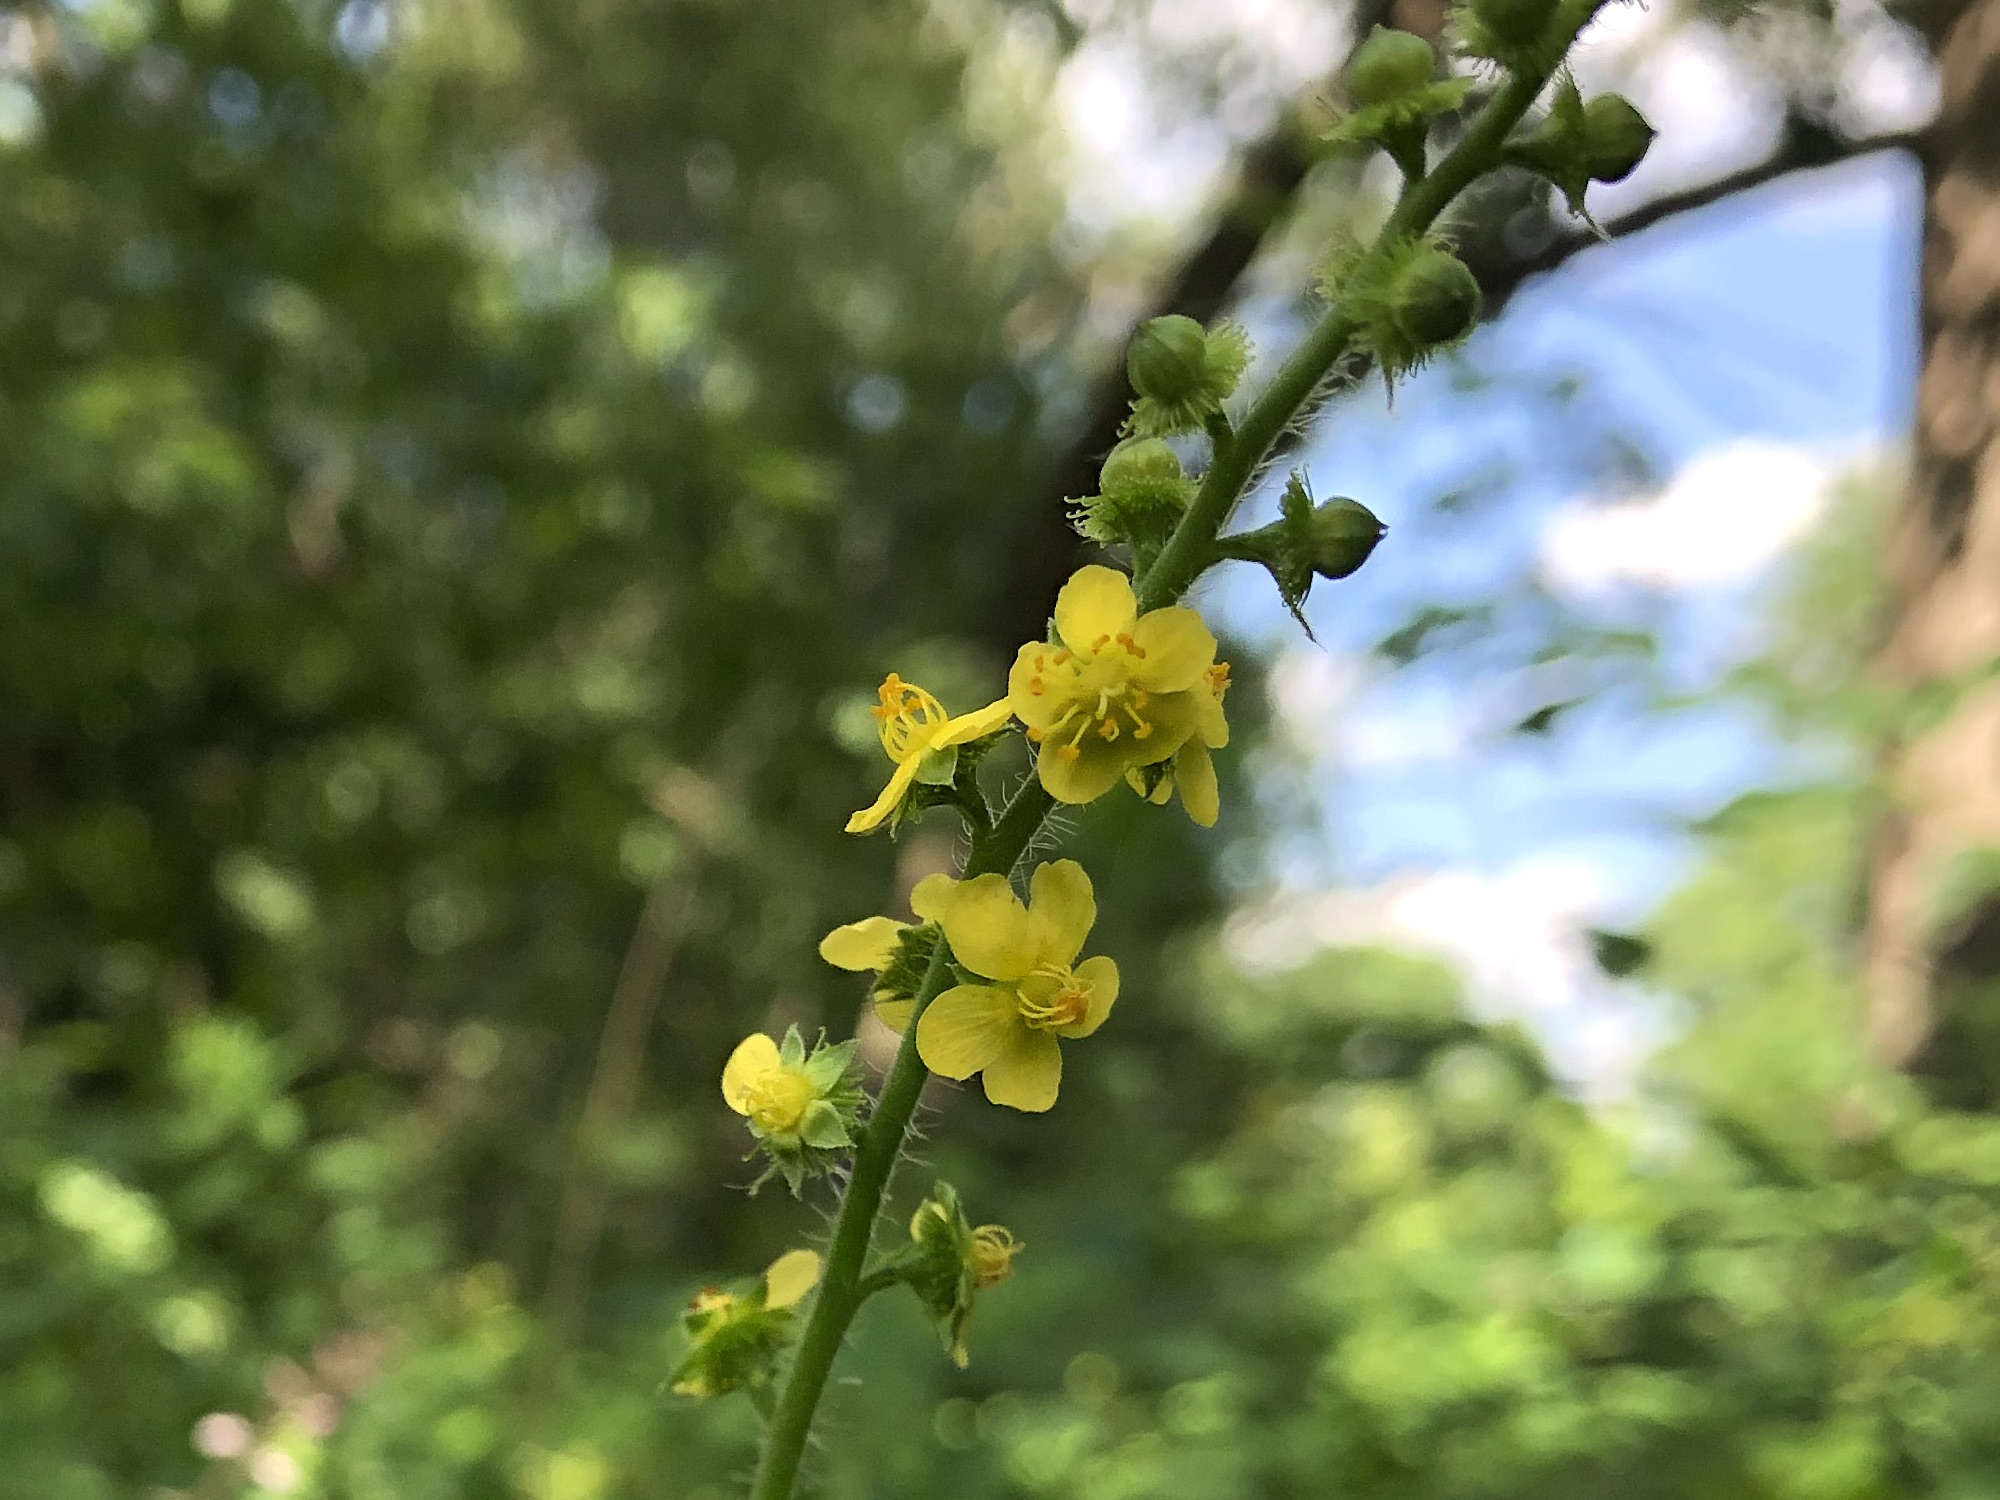 Tall Hairy Agrimony at edge of Nakoma Park natural area in Madison, Wisconsin on July 9, 2022